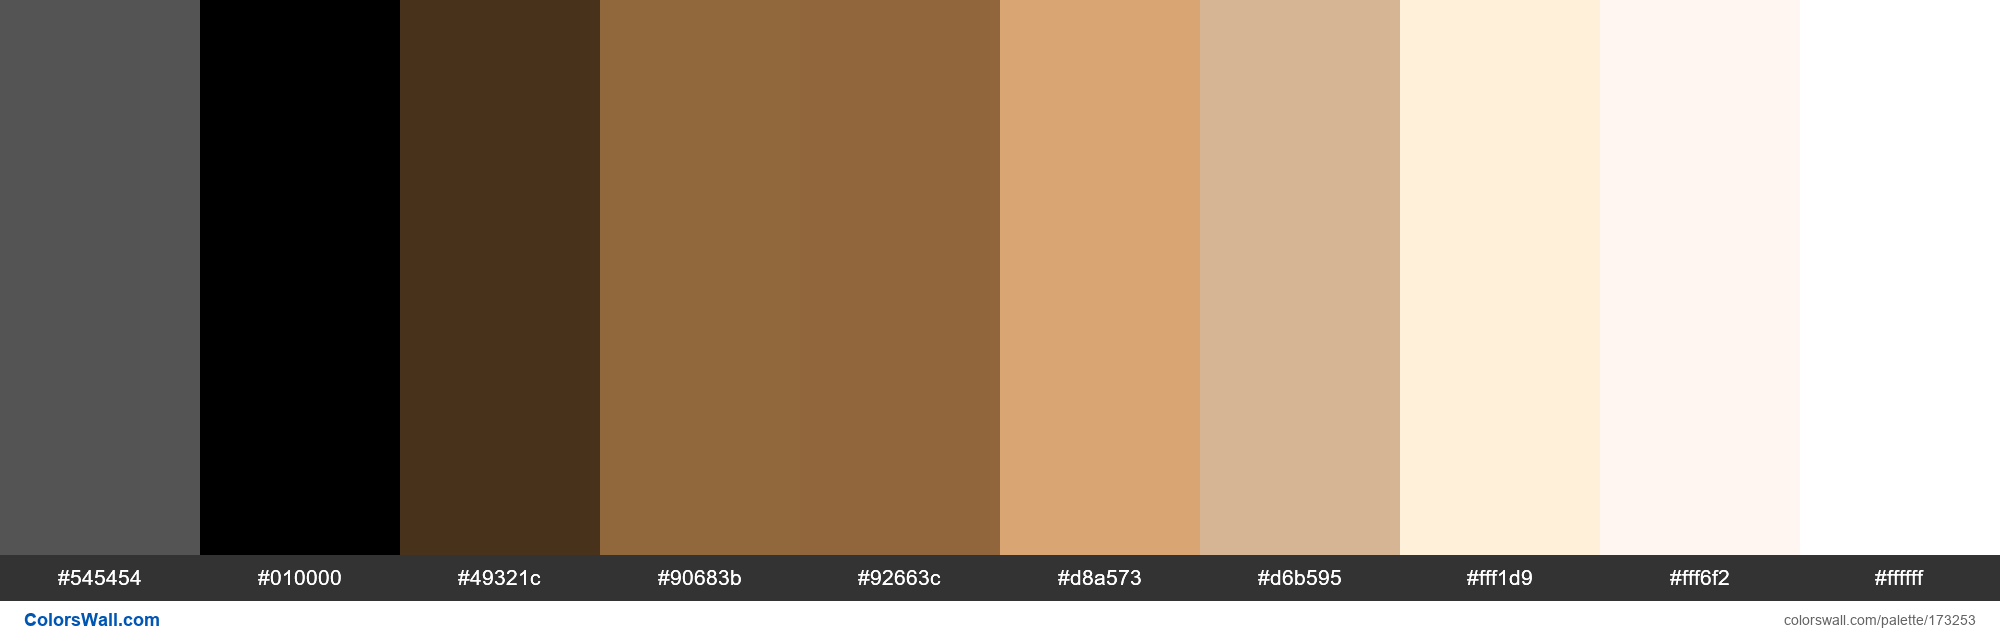 16 Brown Color Palettes Curated Collection Of Color Palettes | vlr.eng.br